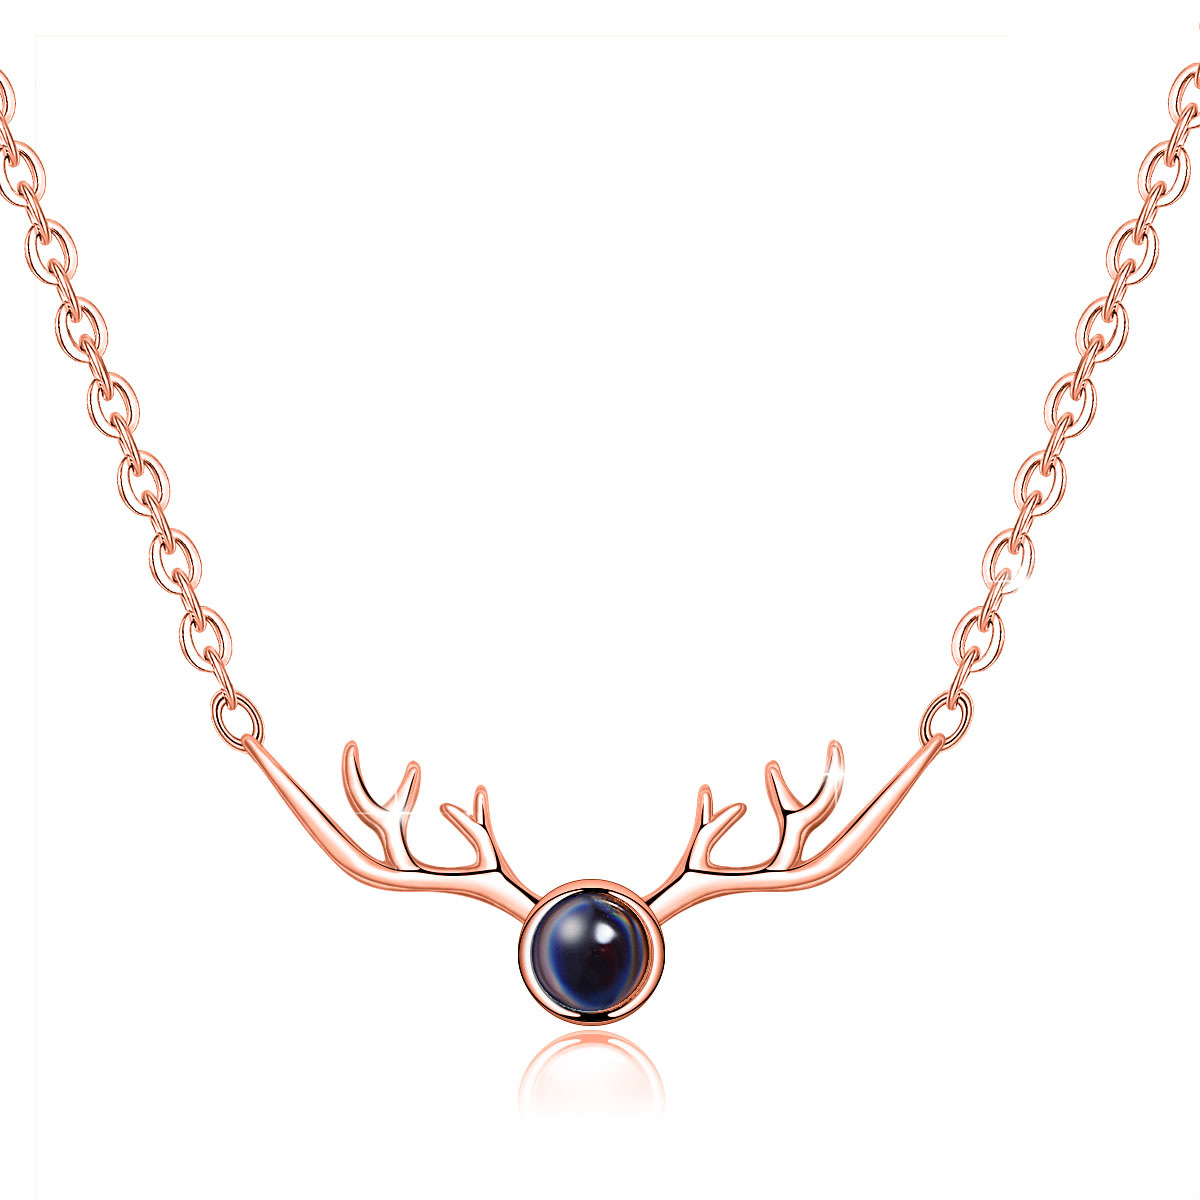 Merryshine Jewelry Rose Gold Plated Antler Design 100 Different Languages I Love You Projection Necklace